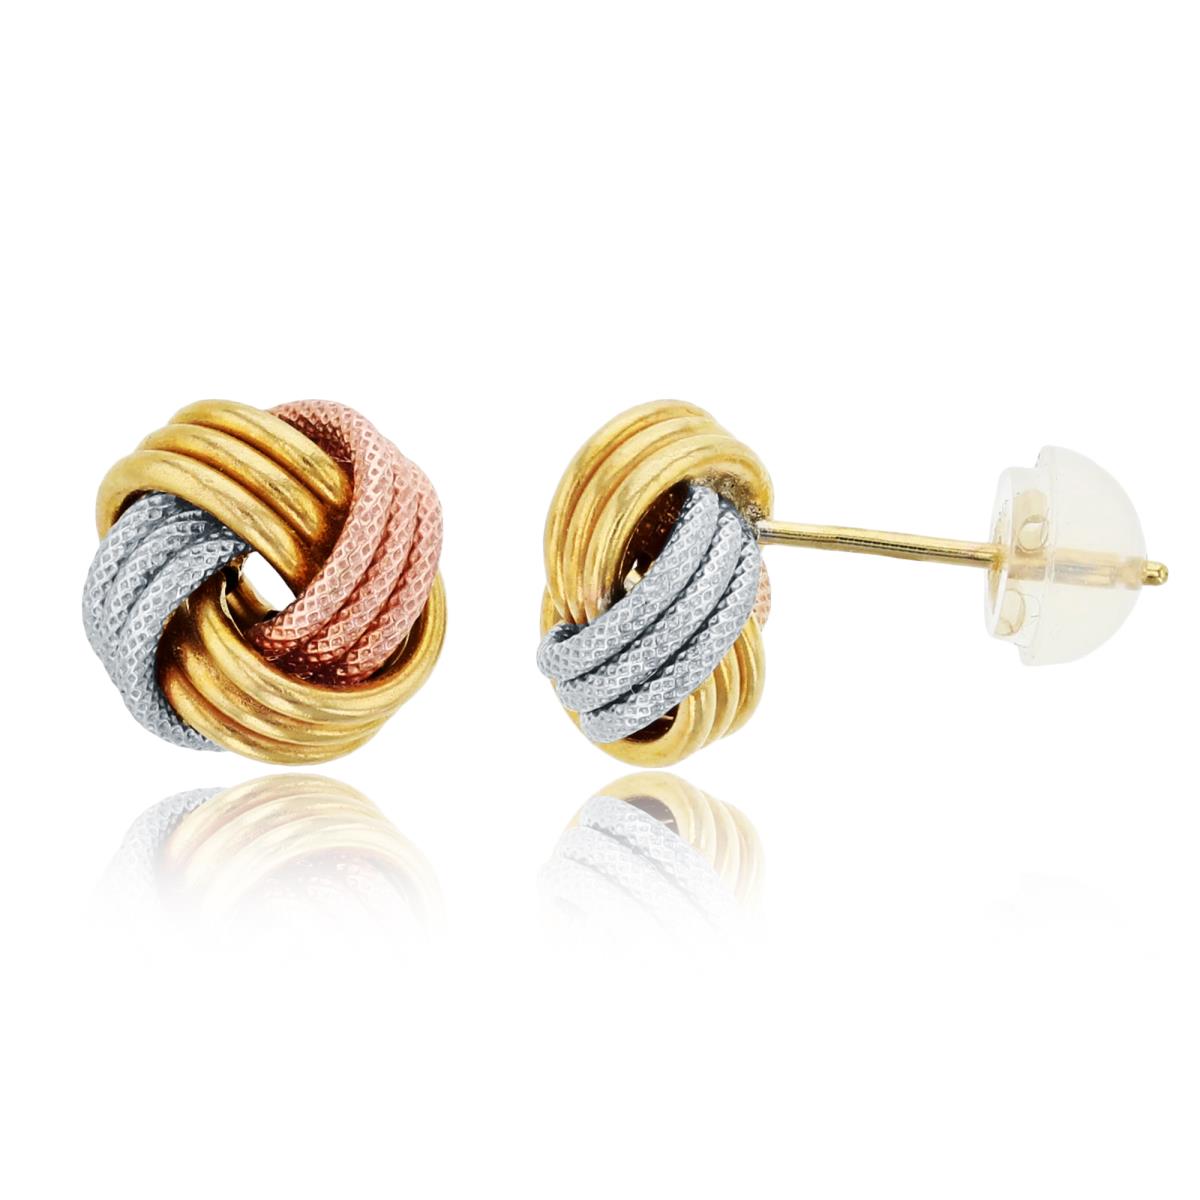 10K Tri-Color Gold 9x9mm Polished & Textured Love Knot Stud Earring